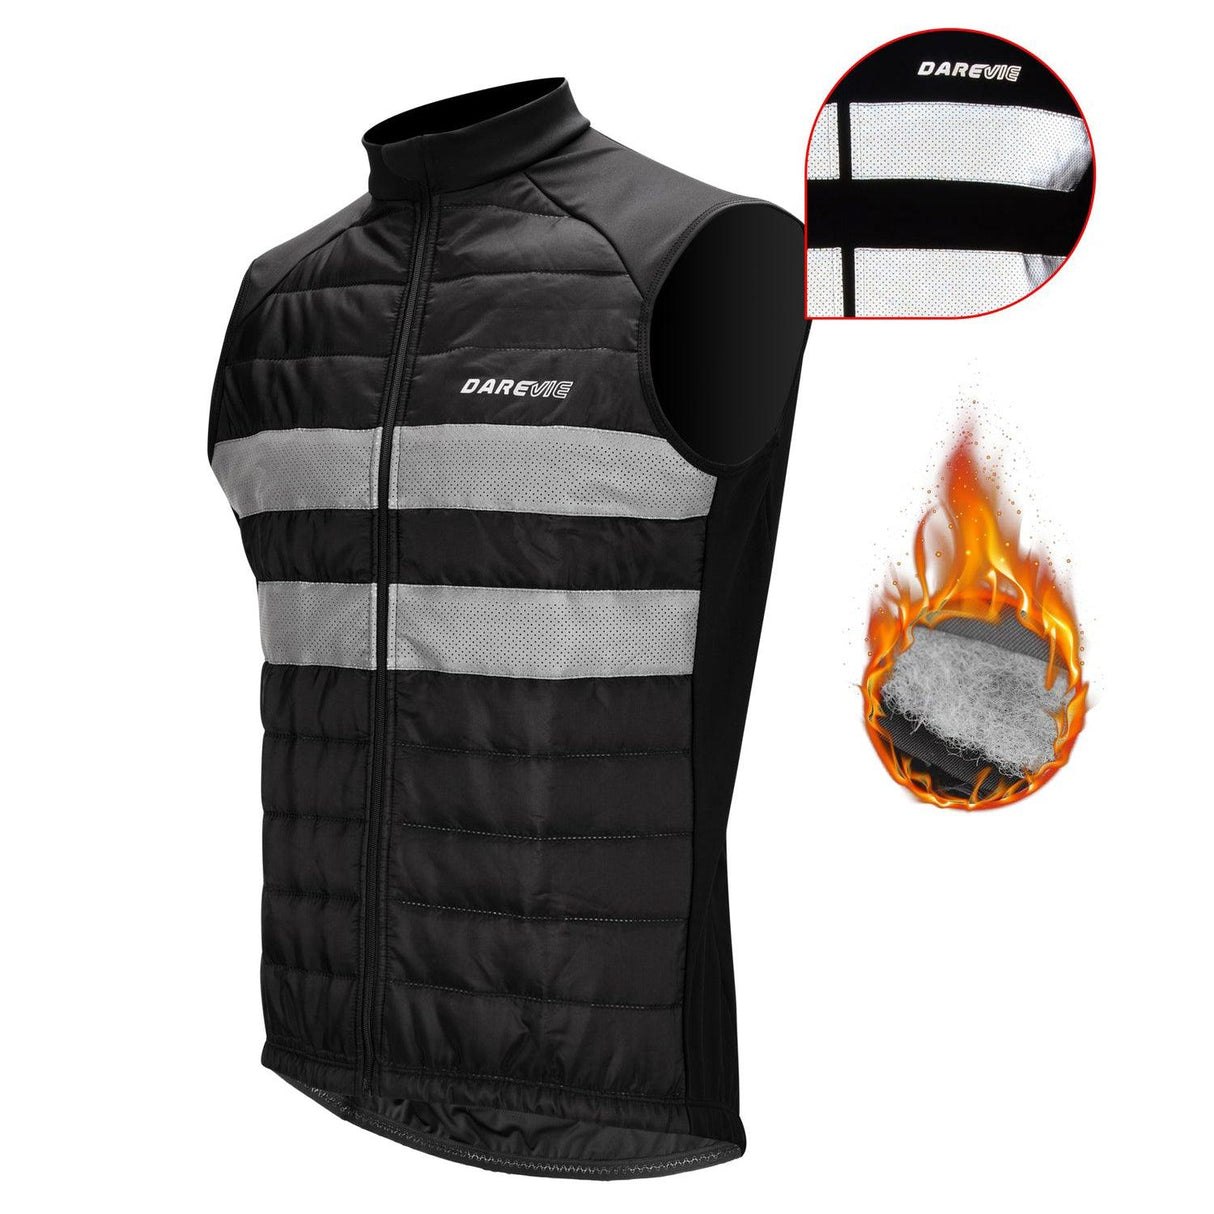 Men's Sage Thermal Cycling Vest, Alpine Cold Weather